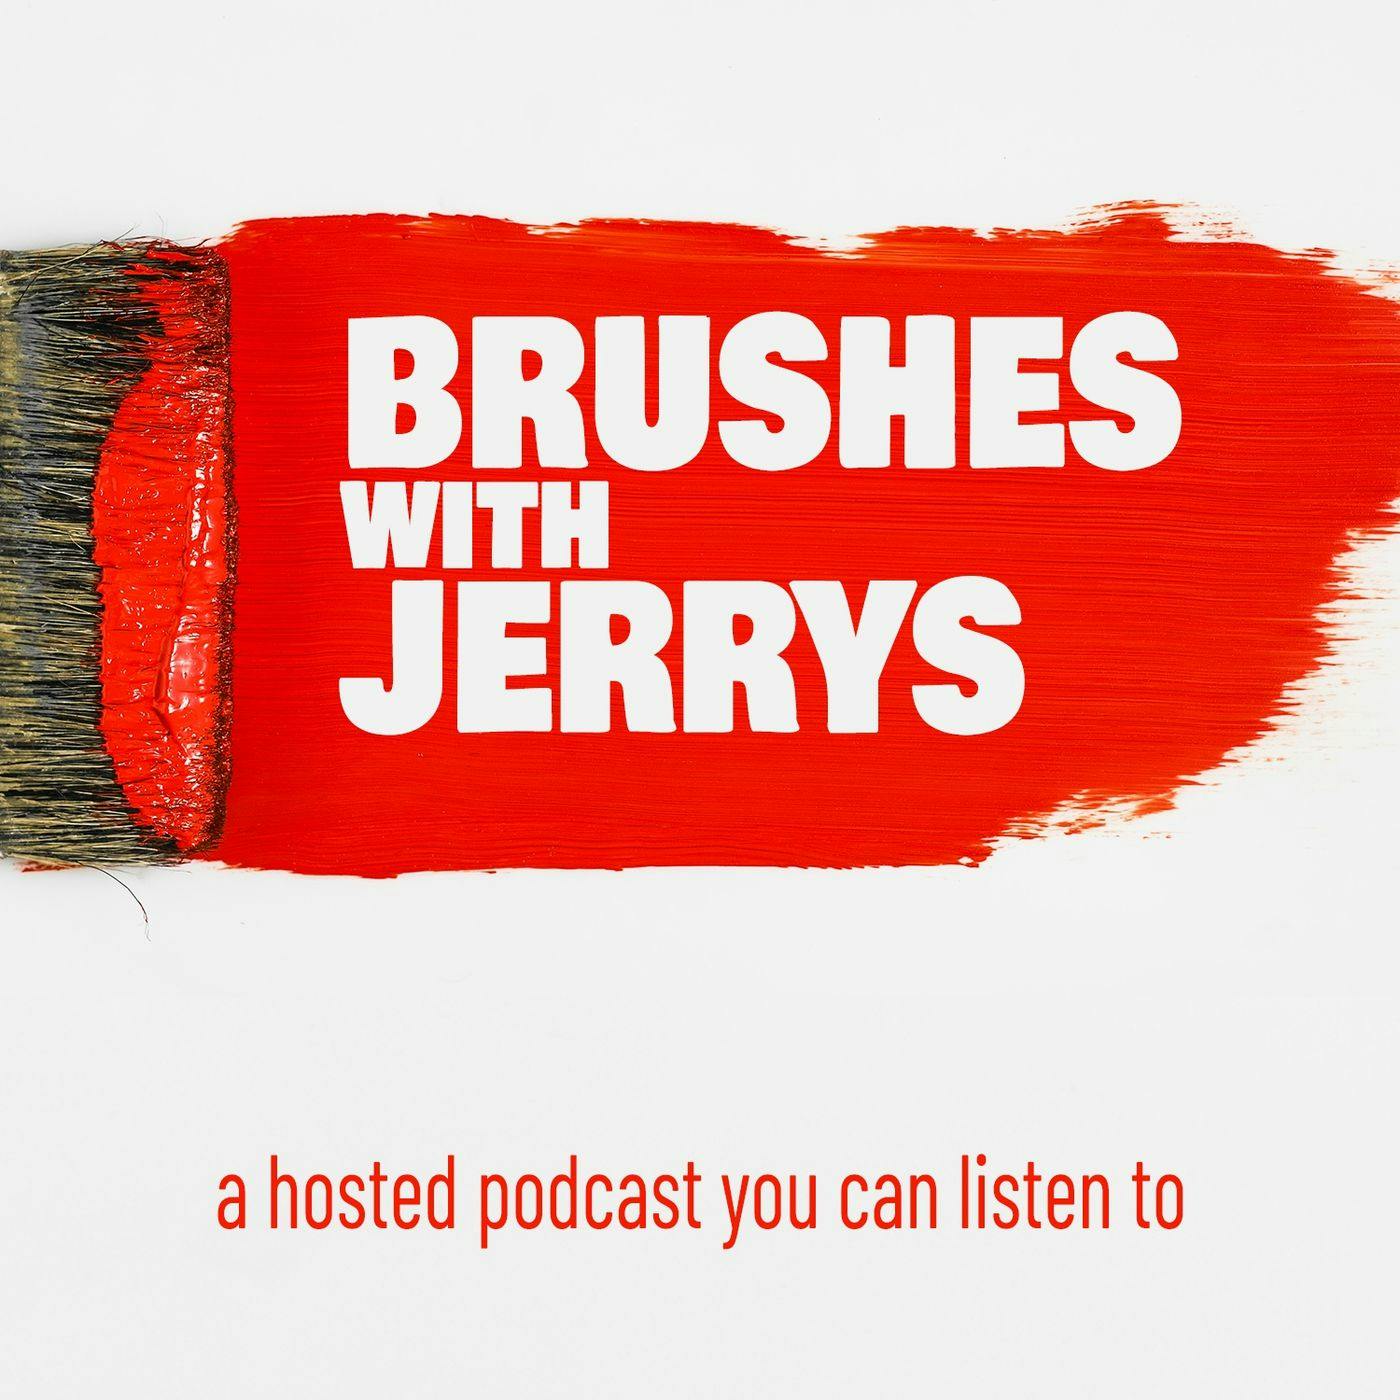 This is episode 4 of Brushes with Jerrys